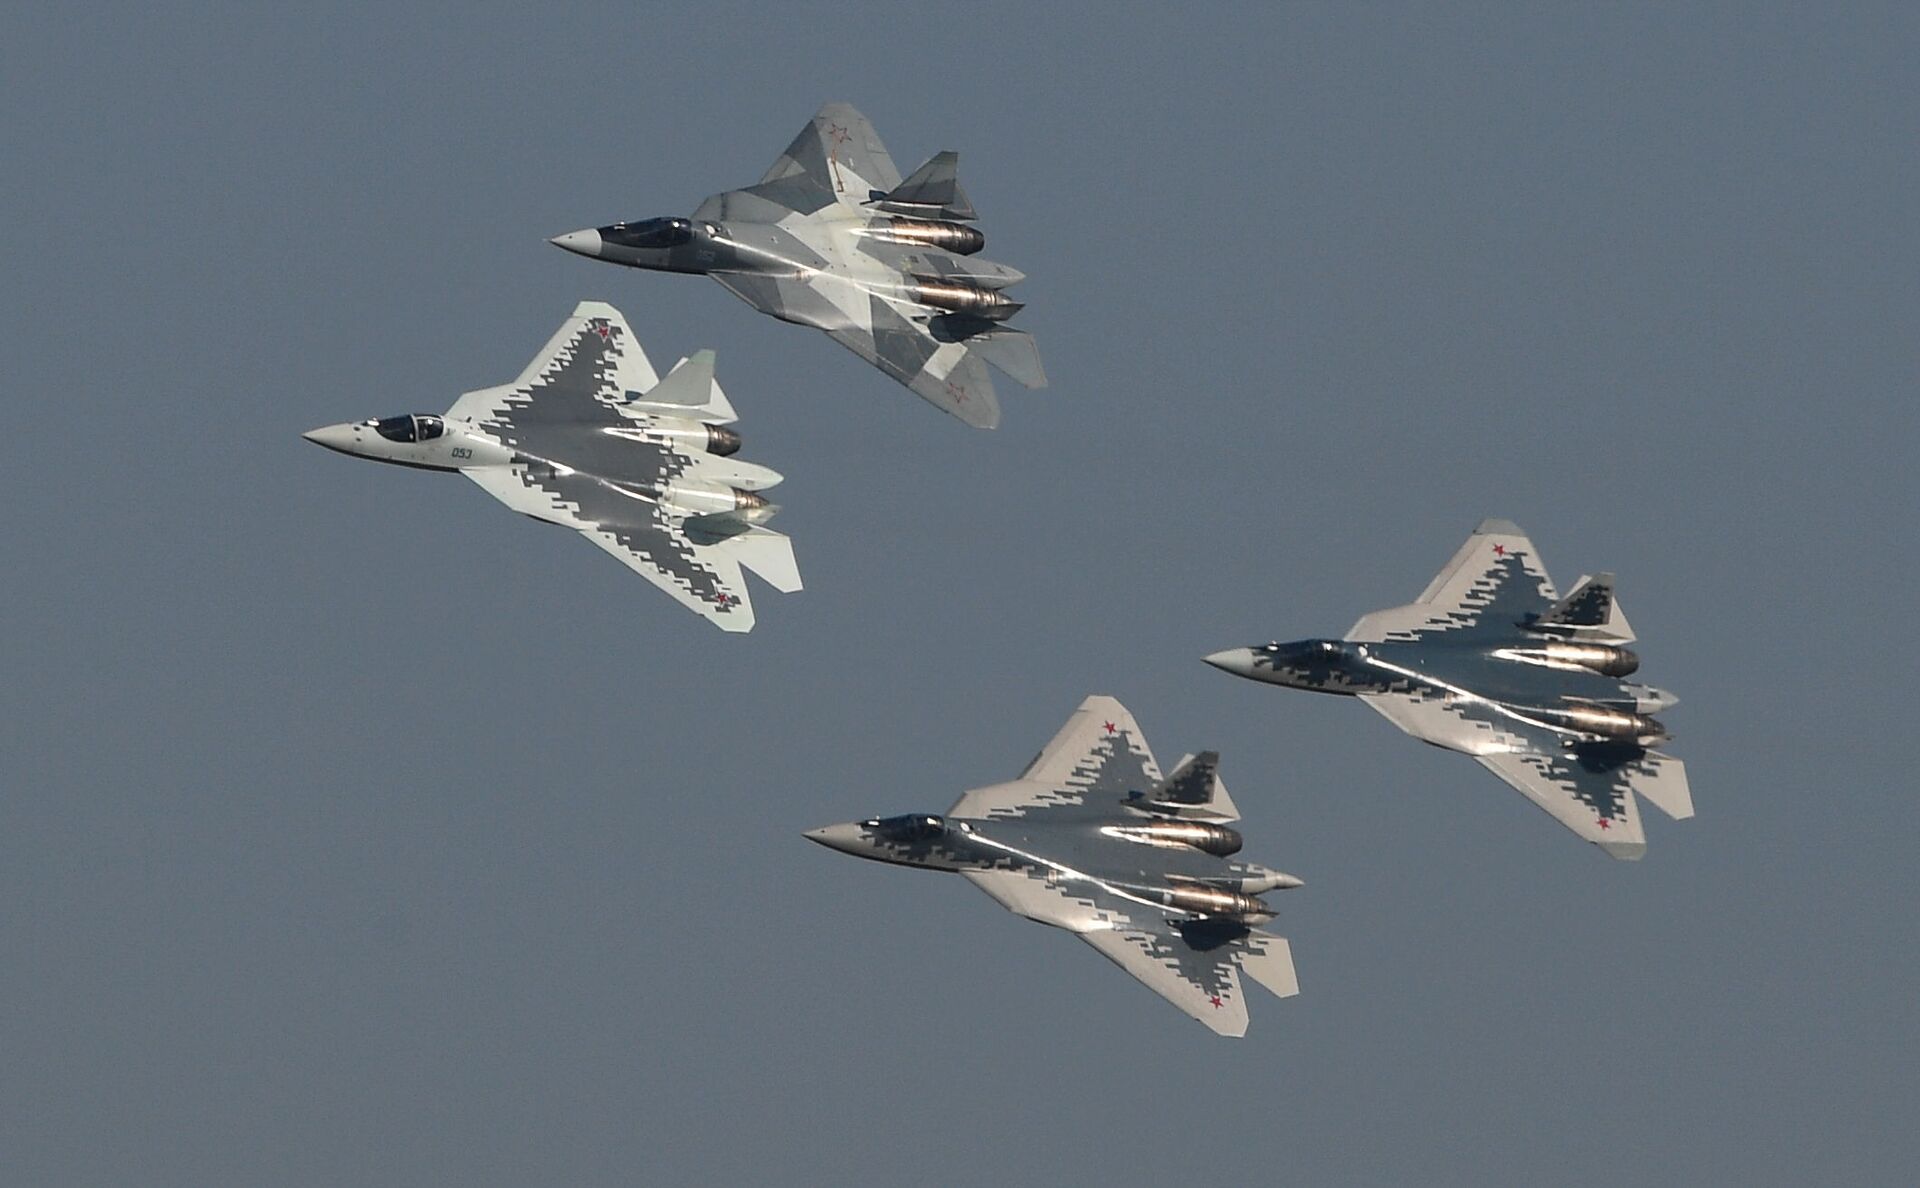 5th generation Sukhoi Su-57 fighter jets perform at the MAKS-2019 international aviation and space show in Zhukovsky, outside Moscow, Russia - Sputnik International, 1920, 24.02.2022